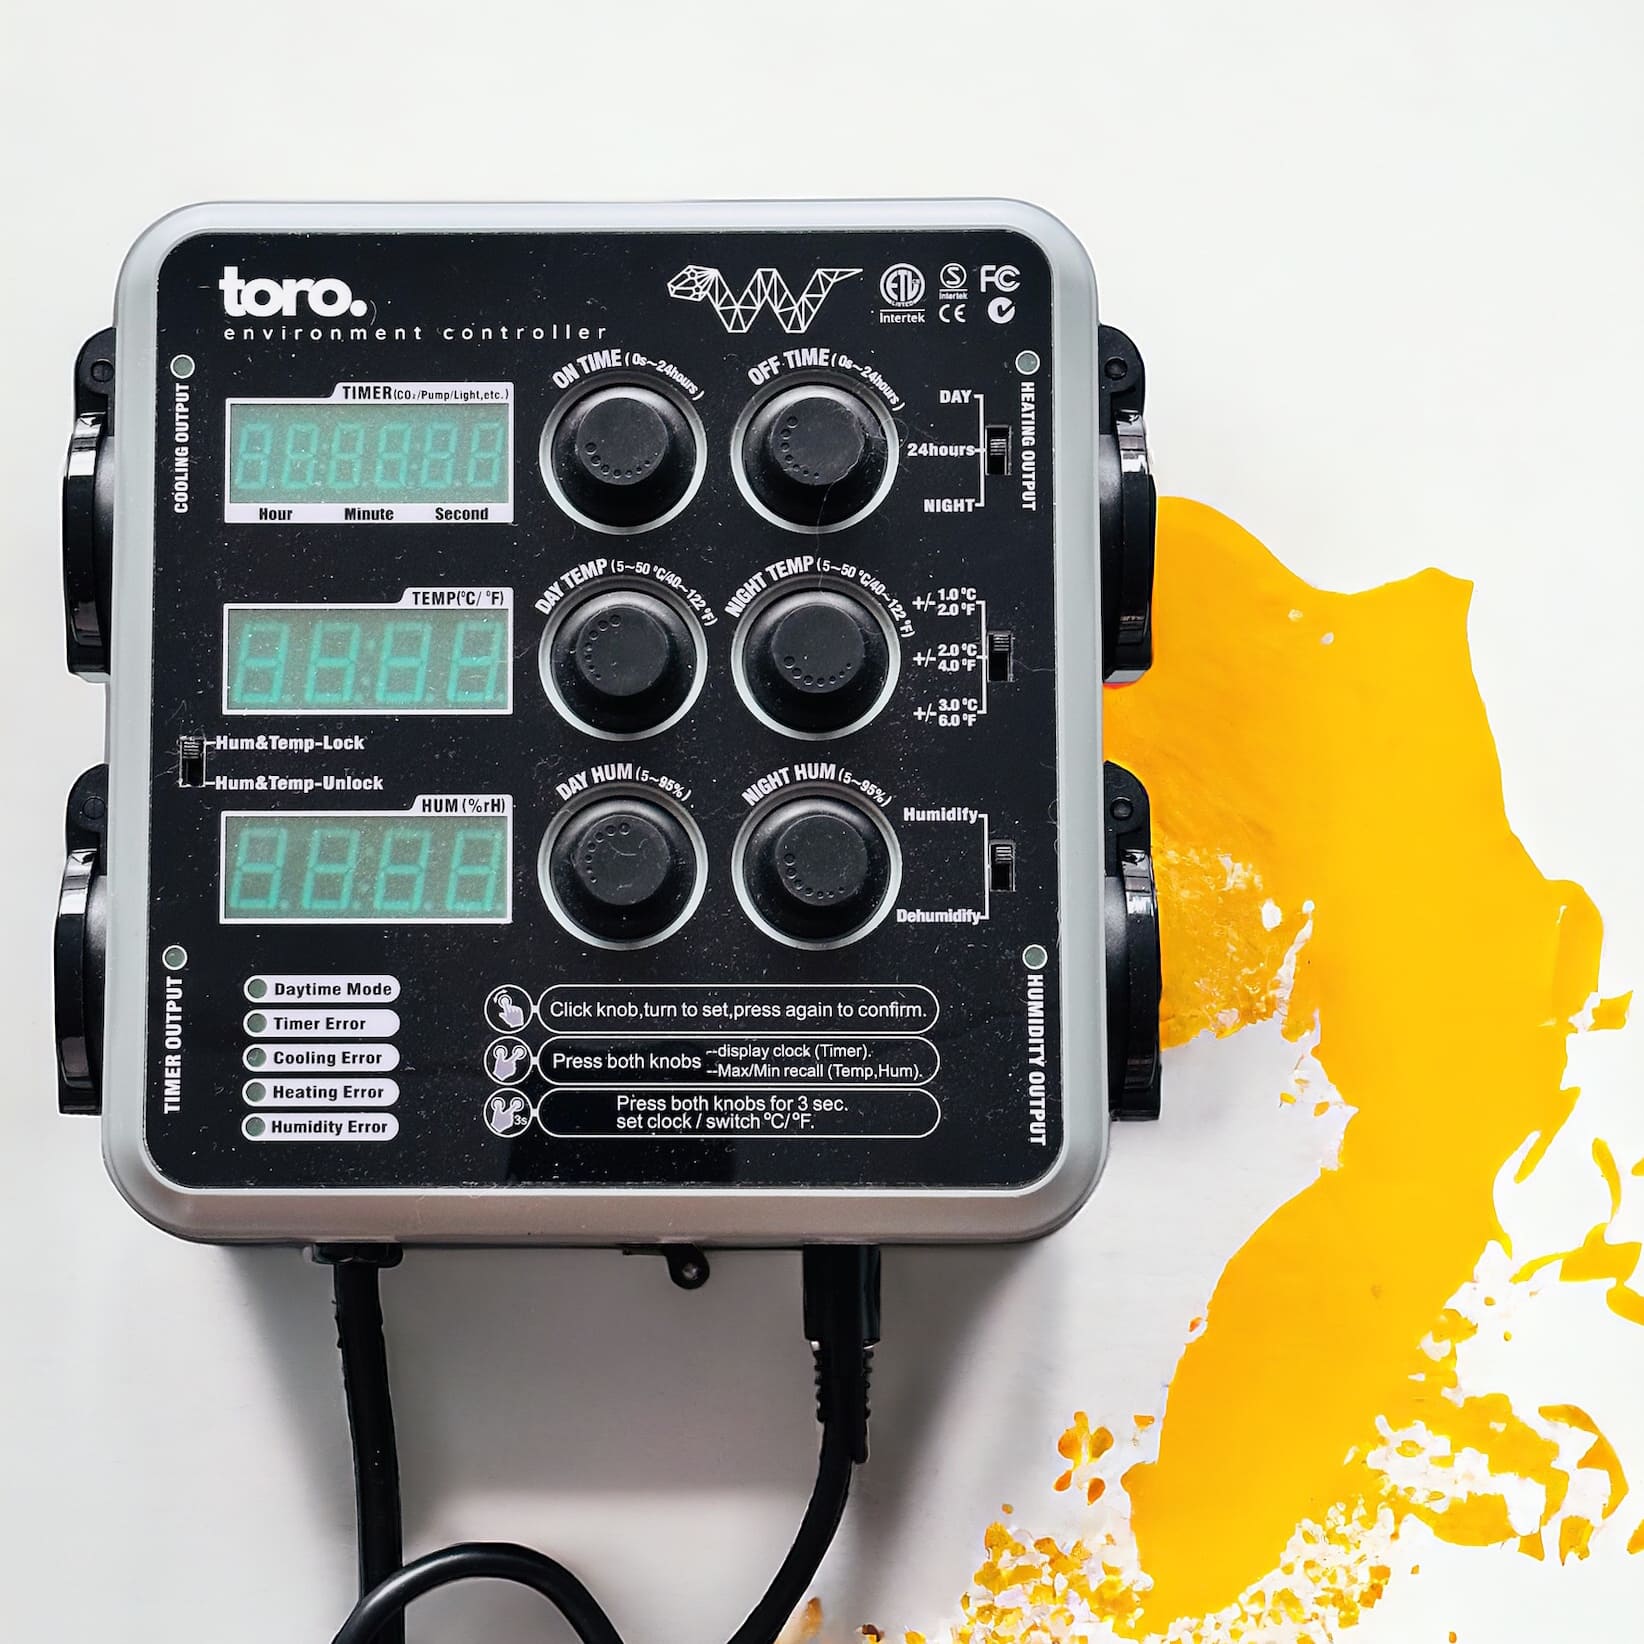 The product is displayed on white surface with a yellow color splash in the background. TORO Climate Control controls heating, cooling, humidity, and timed devices with its four 240V receptacles. Need to trigger lighting or operate pumps? The timer outlet has got you covered.